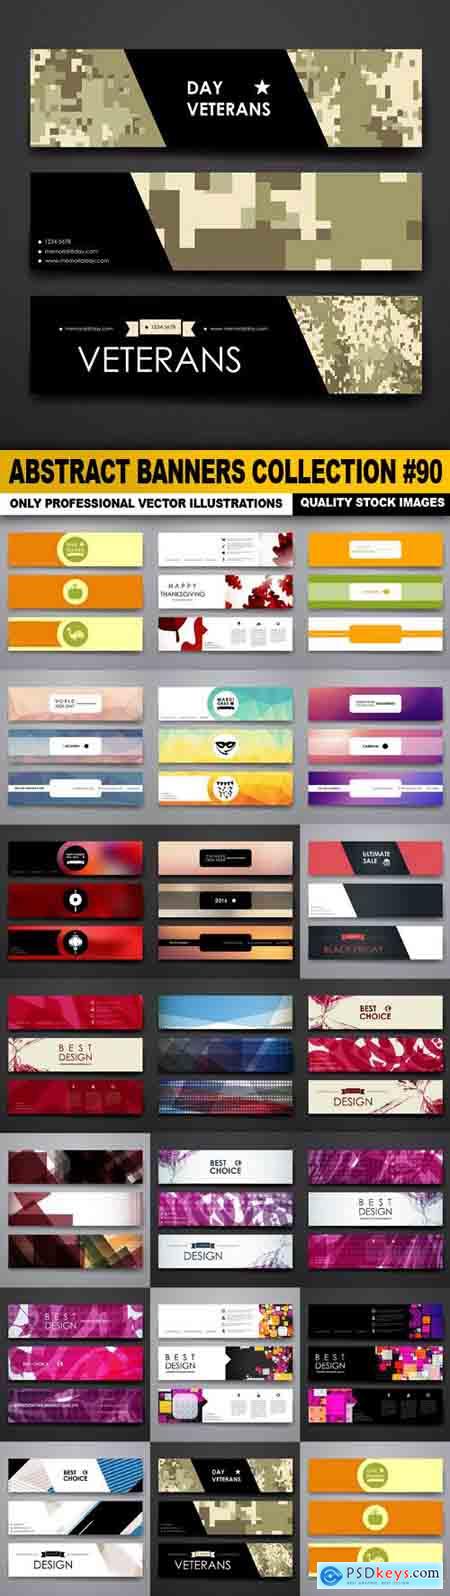 Abstract Banners Collection #90 - 20 Vectors